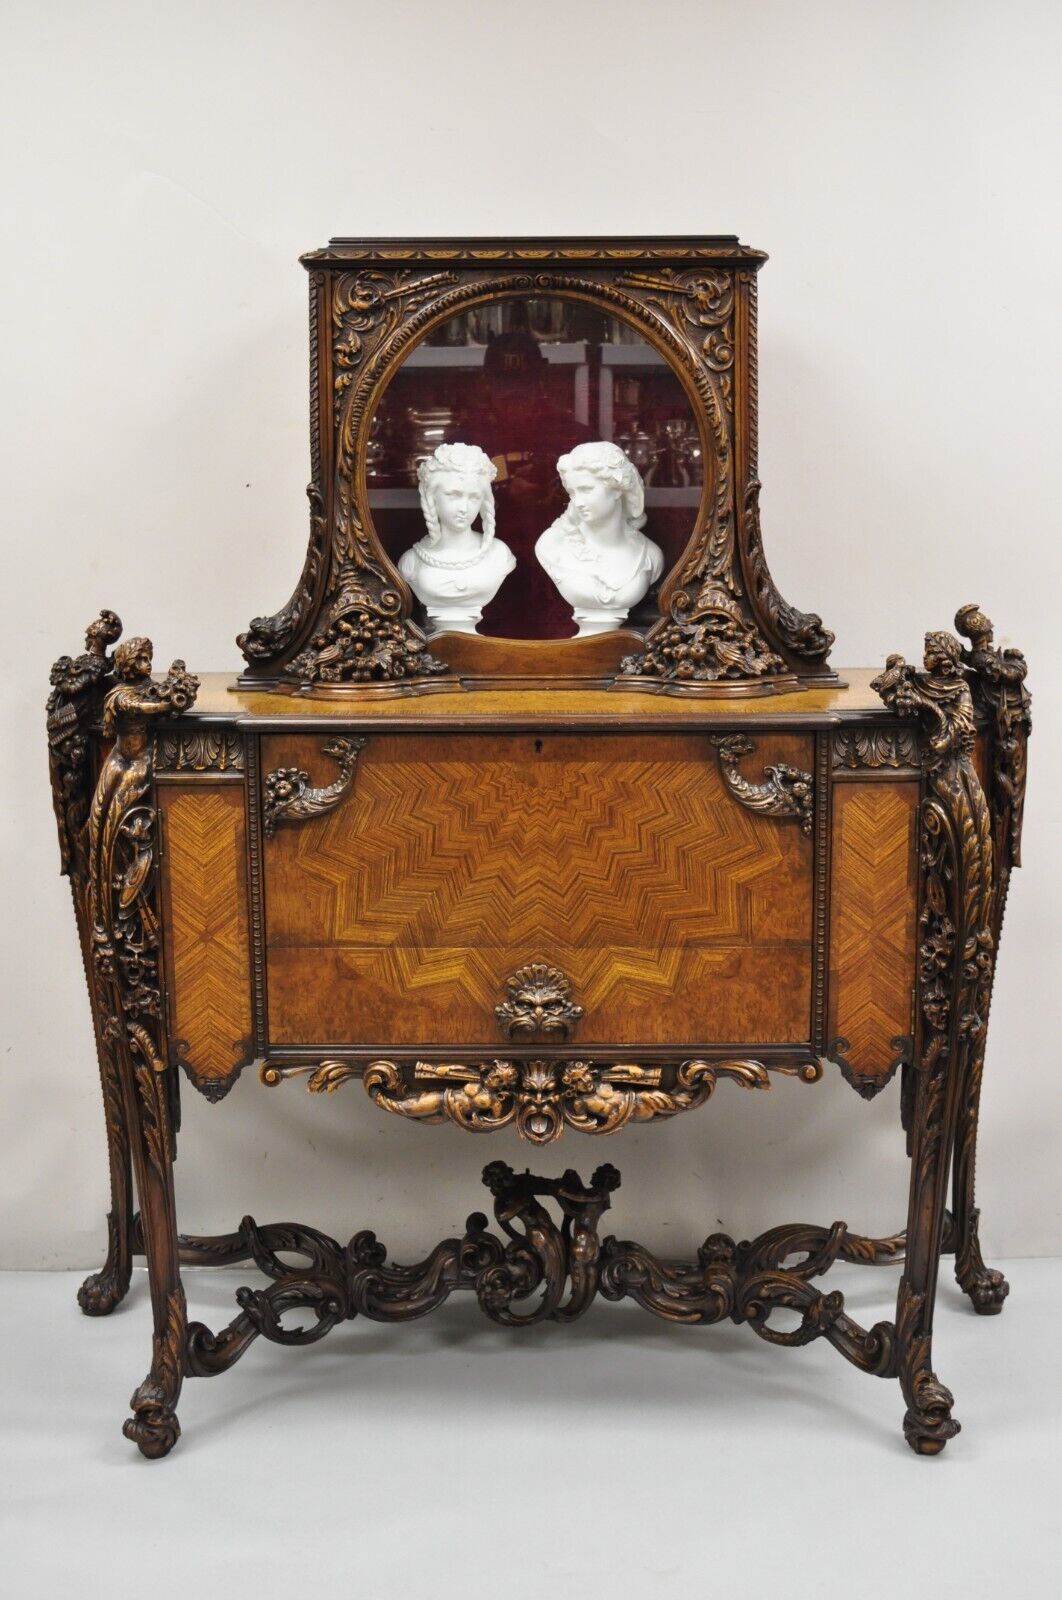 French Renaissance Louis XV Style Figural Carved Walnut Curio Display Buffet